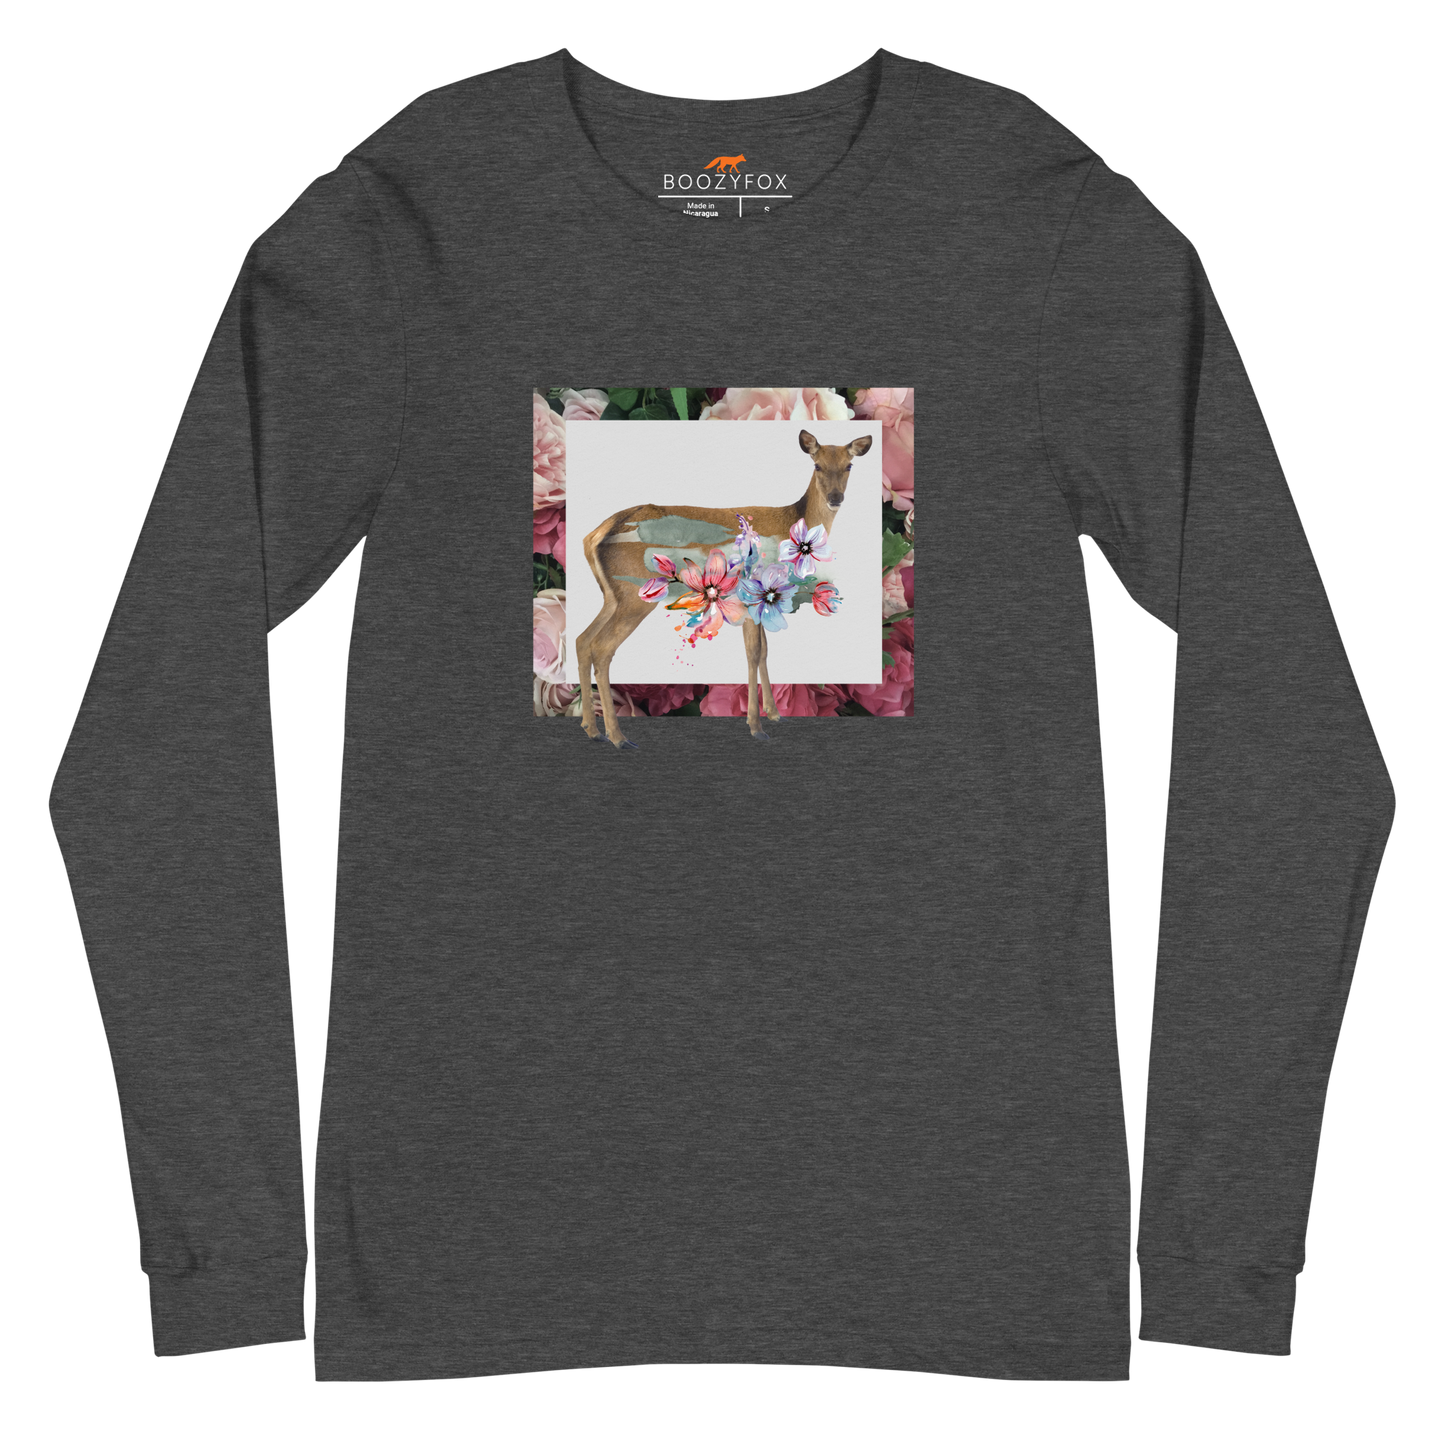 Dark Grey Heather Deer Long Sleeve Tee featuring a captivating Floral Deer graphic on the chest - Cute Deer Long Sleeve Graphic Tees - Boozy Fox